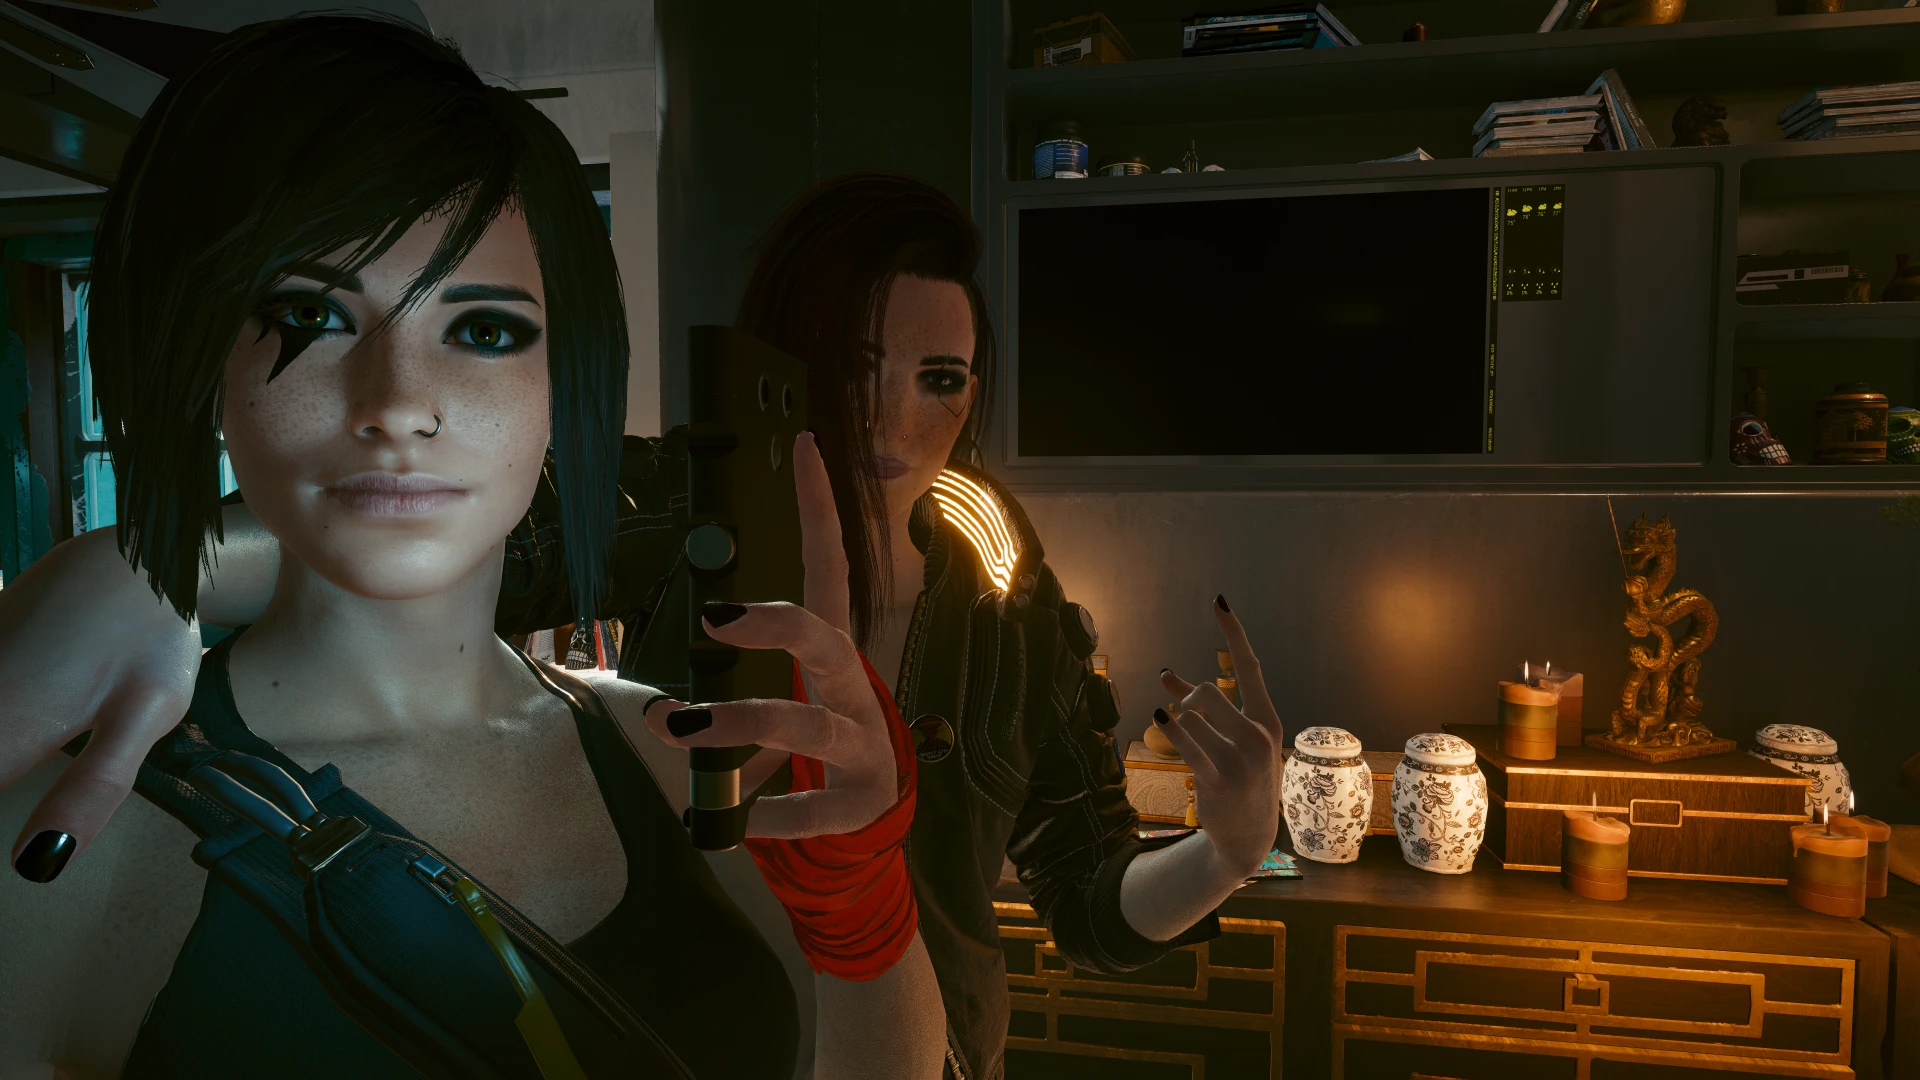 Made Faith in Cyberpunk 2077 (with mods). Mostly based on her